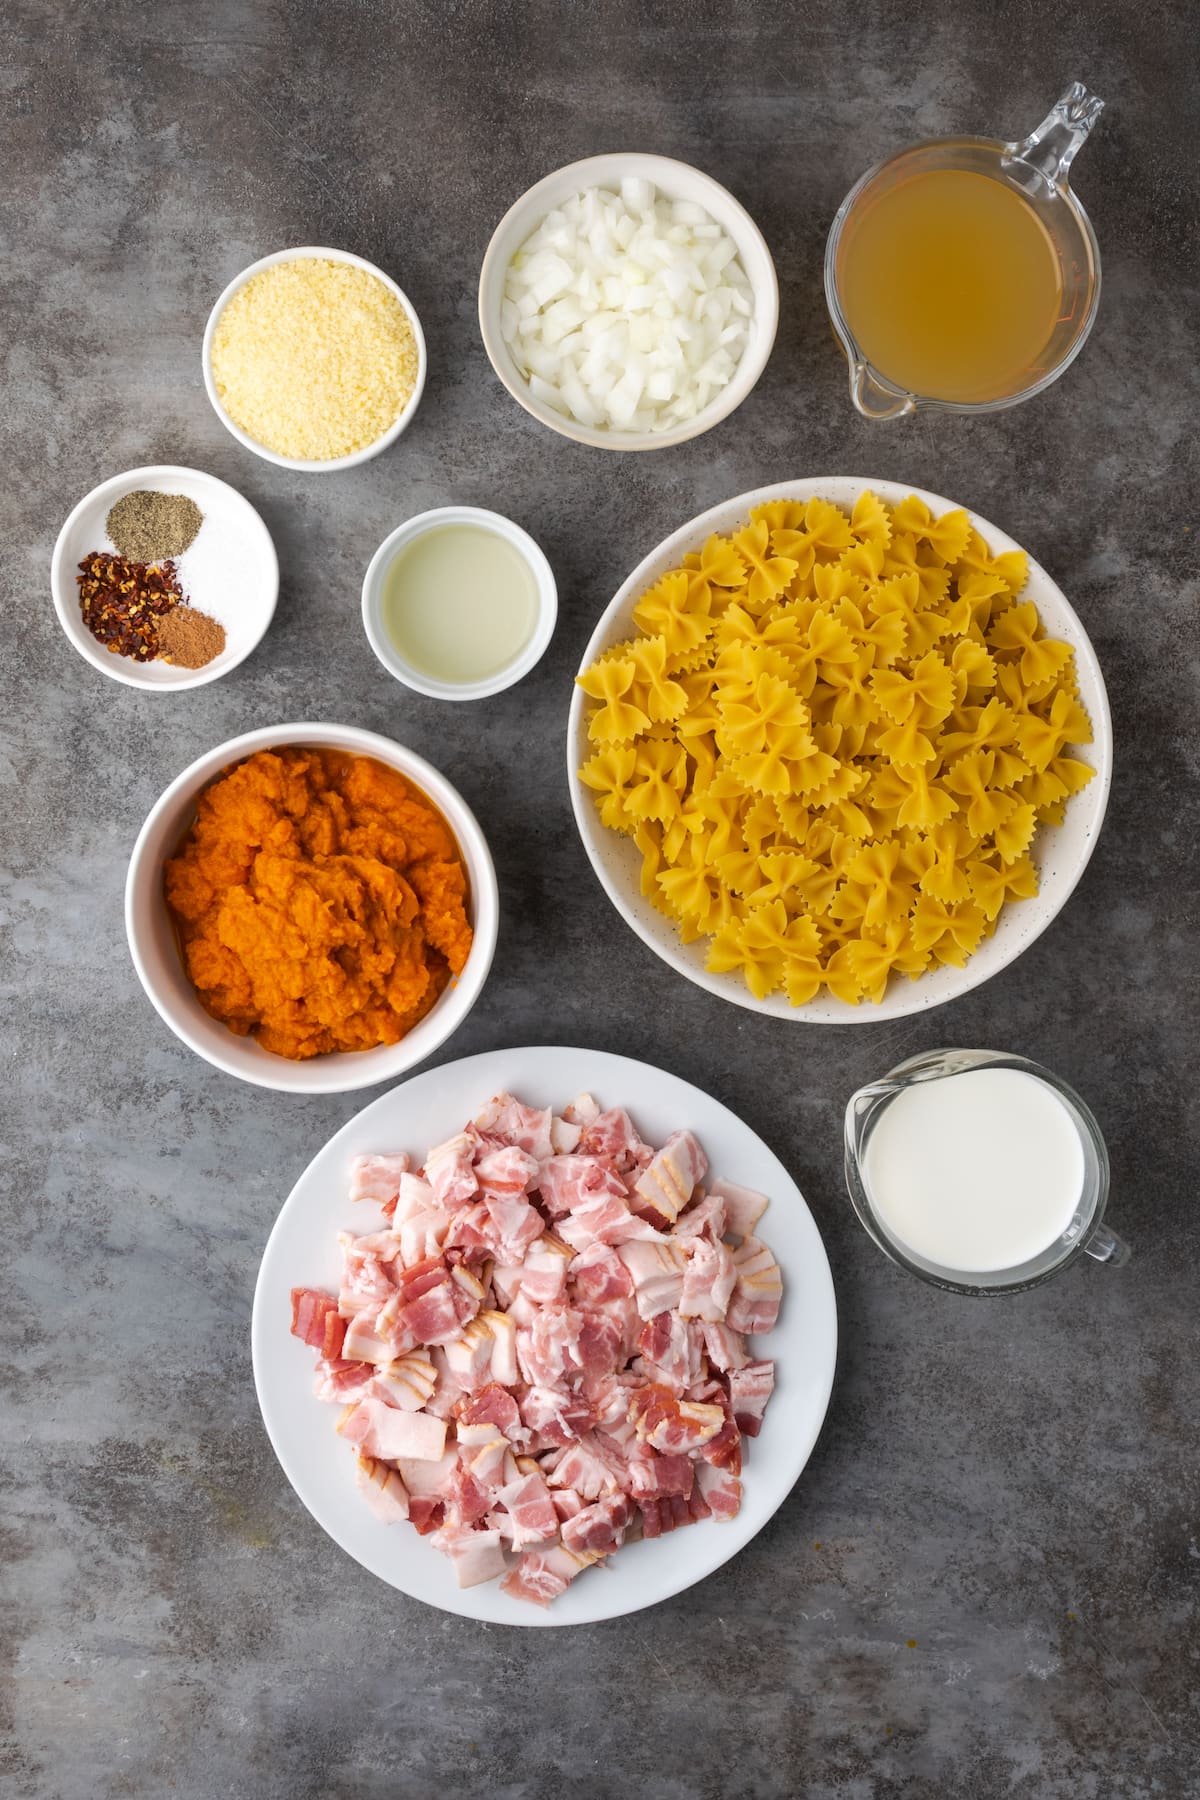 The ingredients for pumpkin pasta with bacon.